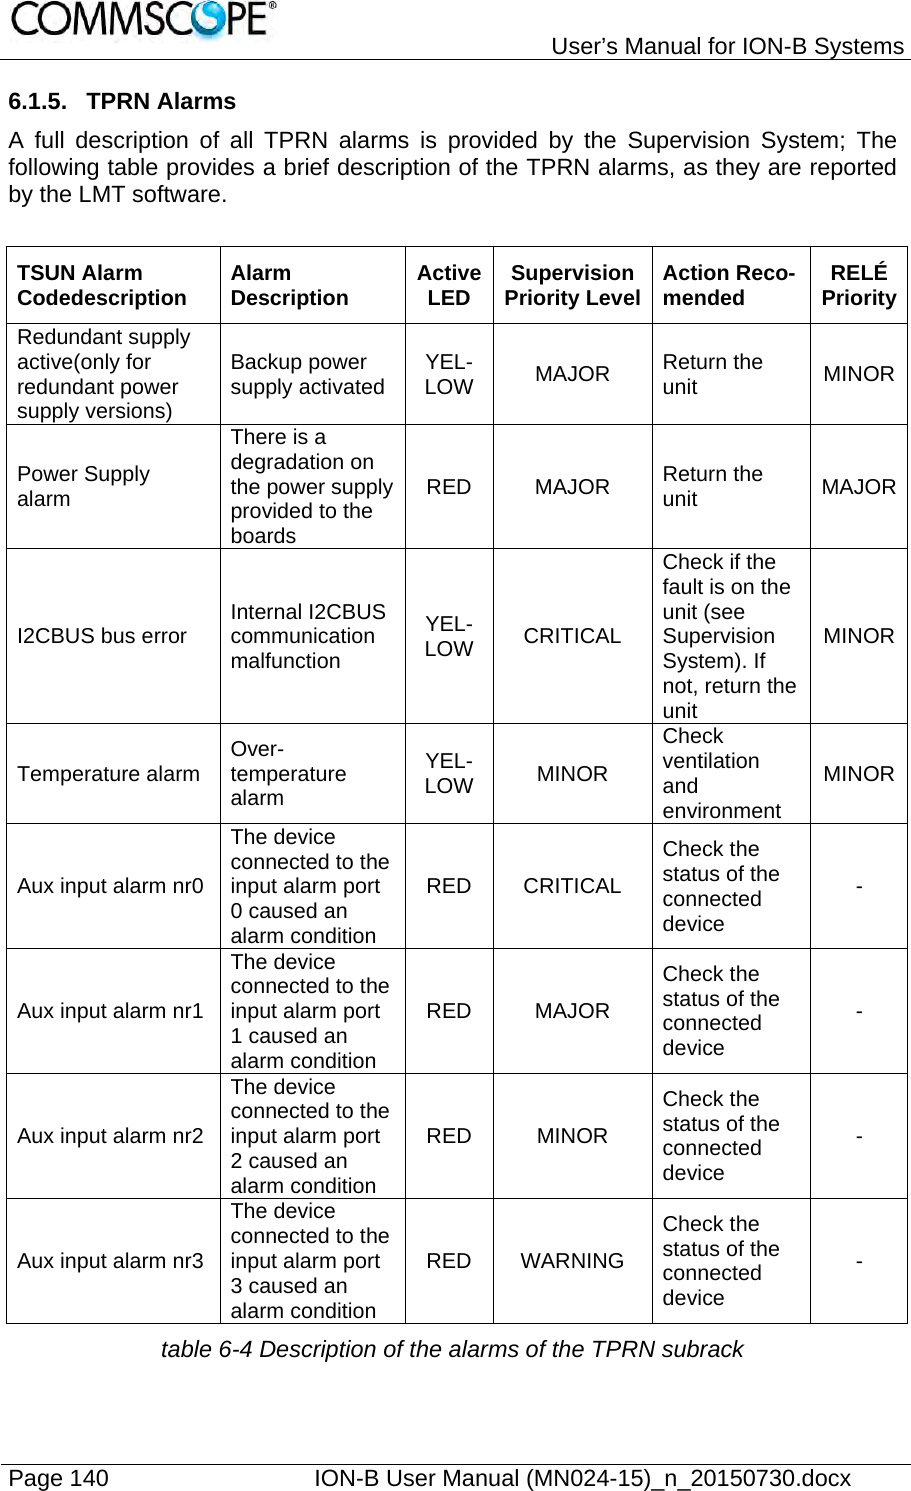   User’s Manual for ION-B Systems Page 140    ION-B User Manual (MN024-15)_n_20150730.docx  6.1.5. TPRN Alarms A full description of all TPRN alarms is provided by the Supervision System; The following table provides a brief description of the TPRN alarms, as they are reported by the LMT software.  TSUN Alarm Codedescription  Alarm Description  Active LED  Supervision Priority Level Action Reco-mended  RELÉ PriorityRedundant supply active(only for redundant power supply versions) Backup power supply activated  YEL-LOW  MAJOR  Return the unit  MINOR Power Supply alarm There is a degradation on the power supply provided to the boards RED MAJOR Return the unit  MAJORI2CBUS bus error  Internal I2CBUS communication malfunction YEL-LOW  CRITICAL Check if the fault is on the unit (see Supervision System). If not, return the unit MINOR Temperature alarm  Over-temperature alarm YEL-LOW  MINOR Check ventilation and environment MINOR Aux input alarm nr0 The device connected to the input alarm port 0 caused an alarm condition RED CRITICAL Check the status of the connected device - Aux input alarm nr1 The device connected to the input alarm port 1 caused an alarm condition RED MAJOR Check the status of the connected device - Aux input alarm nr2 The device connected to the input alarm port 2 caused an alarm condition RED MINOR Check the status of the connected device - Aux input alarm nr3 The device connected to the input alarm port 3 caused an alarm conditionRED WARNING Check the status of the connected device - table 6-4 Description of the alarms of the TPRN subrack 